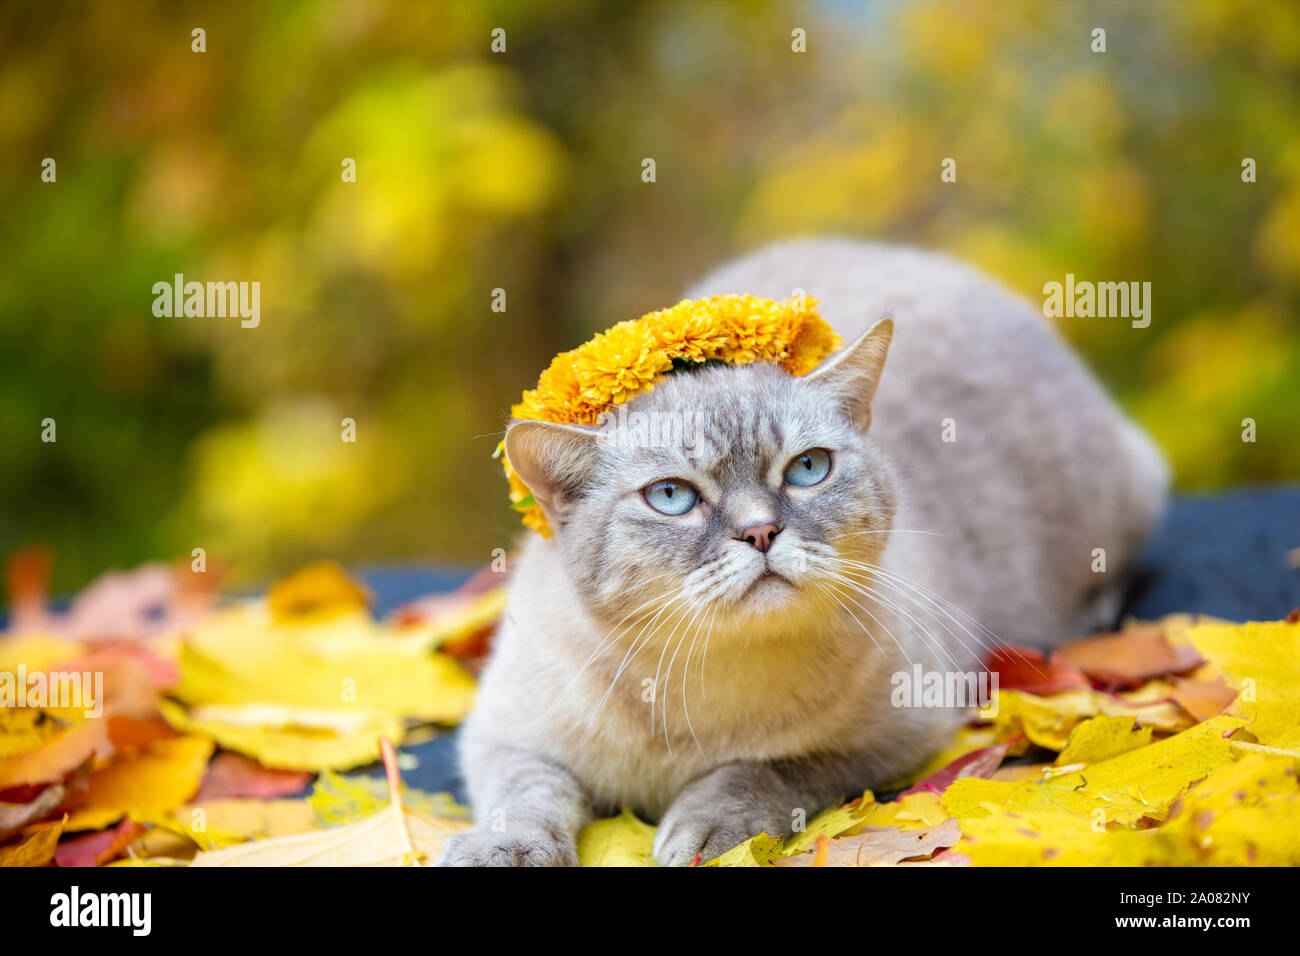 Portrait of a cat outdoors in autumn. Cat crowned flower chaplet and lying on yellow fallen leaves Stock Photo